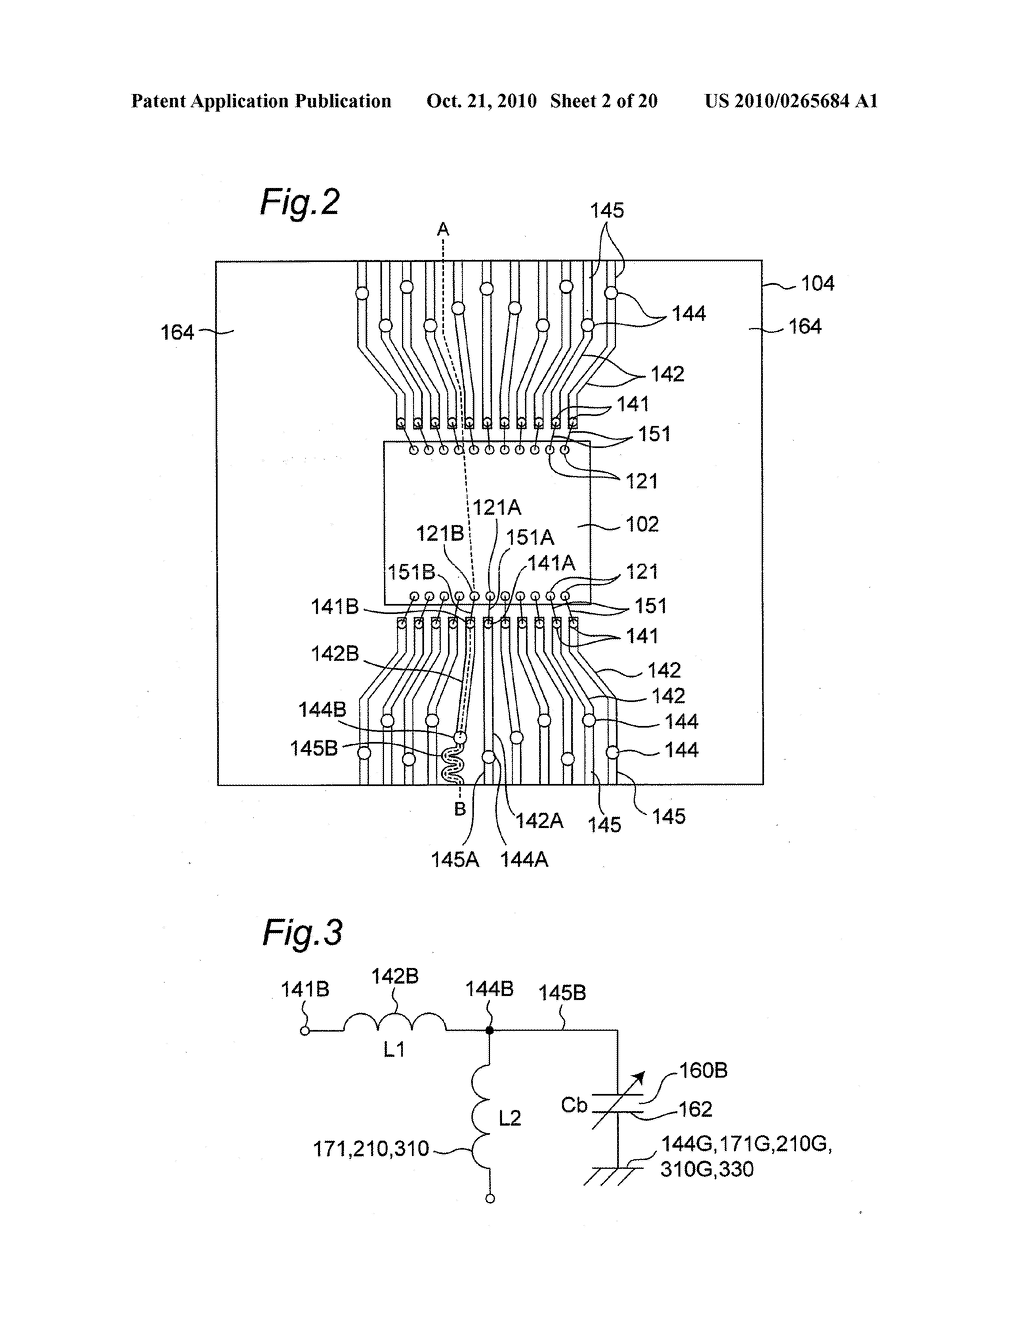 INTERPOSER SUBSTRATE AND INCLUDING CAPACITOR FOR ADJUSTING PHASE OF SIGNAL TRANSMITTED IN SAME INTERPOSER SUBSTRATE - diagram, schematic, and image 03